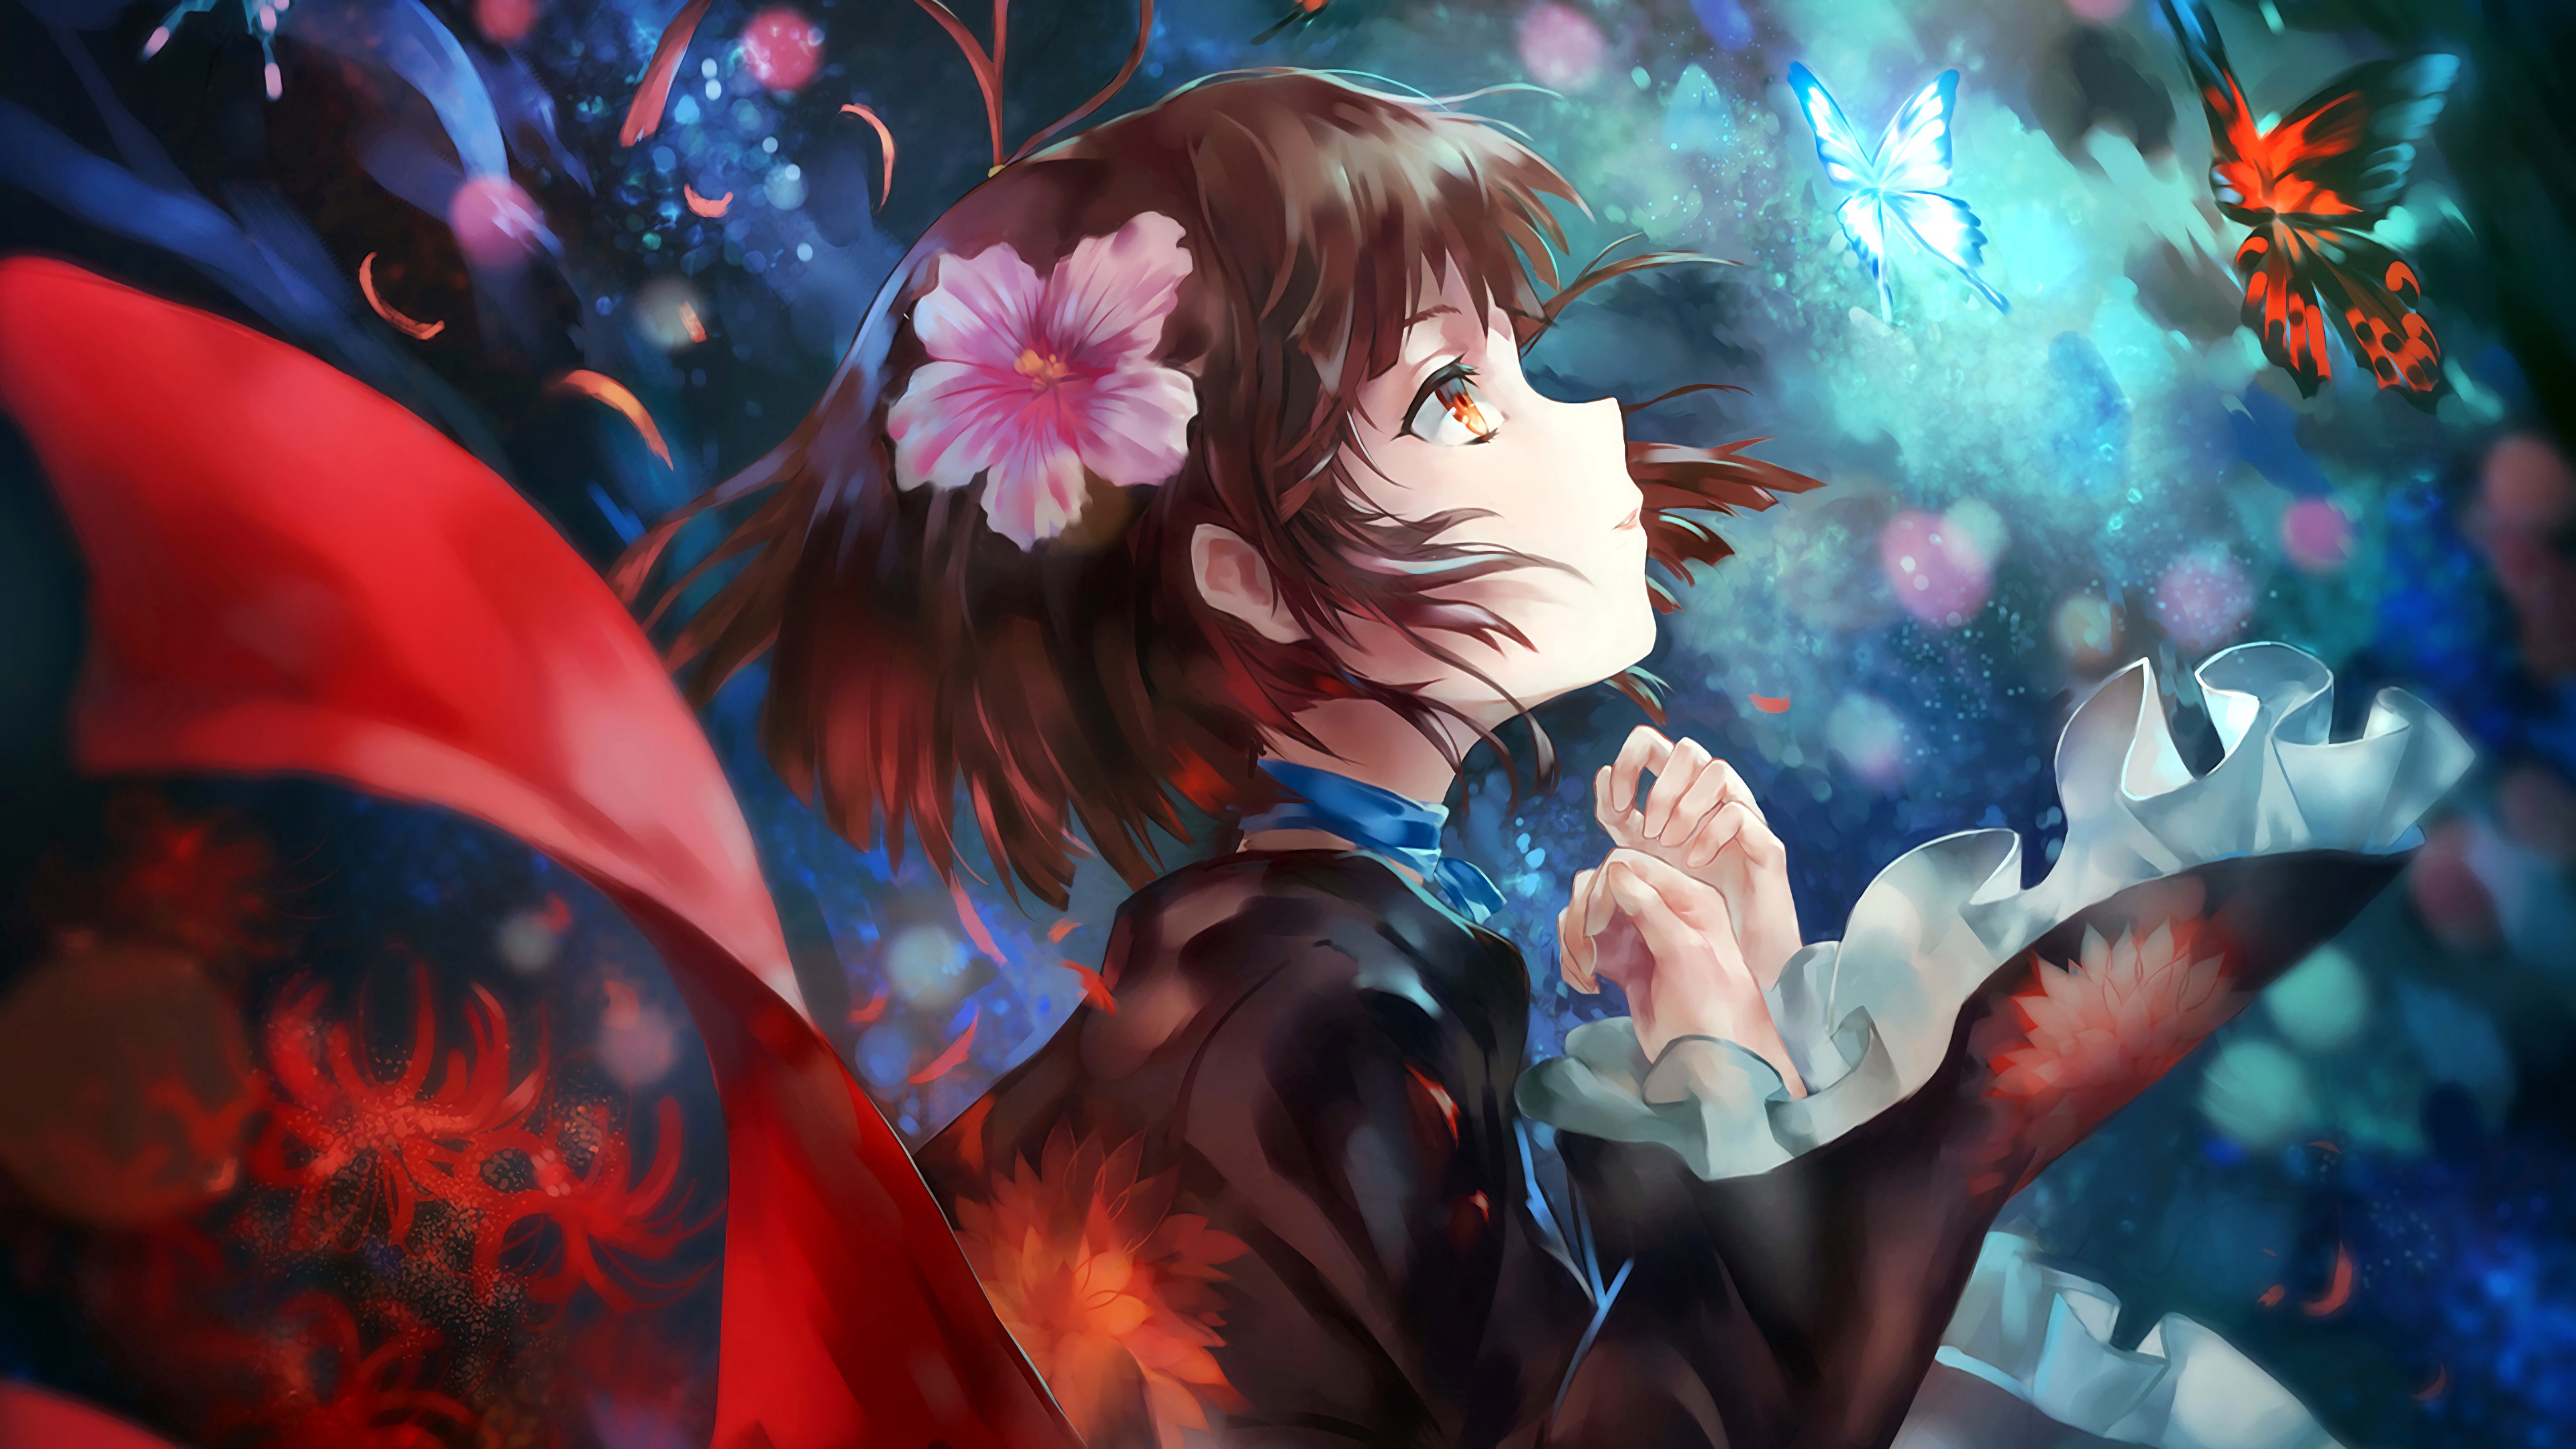 Anime Girls Flower In Hair Brunette Face Profile Anime Butterflies Animals Insect Flowers Plants Kou 3840x2160